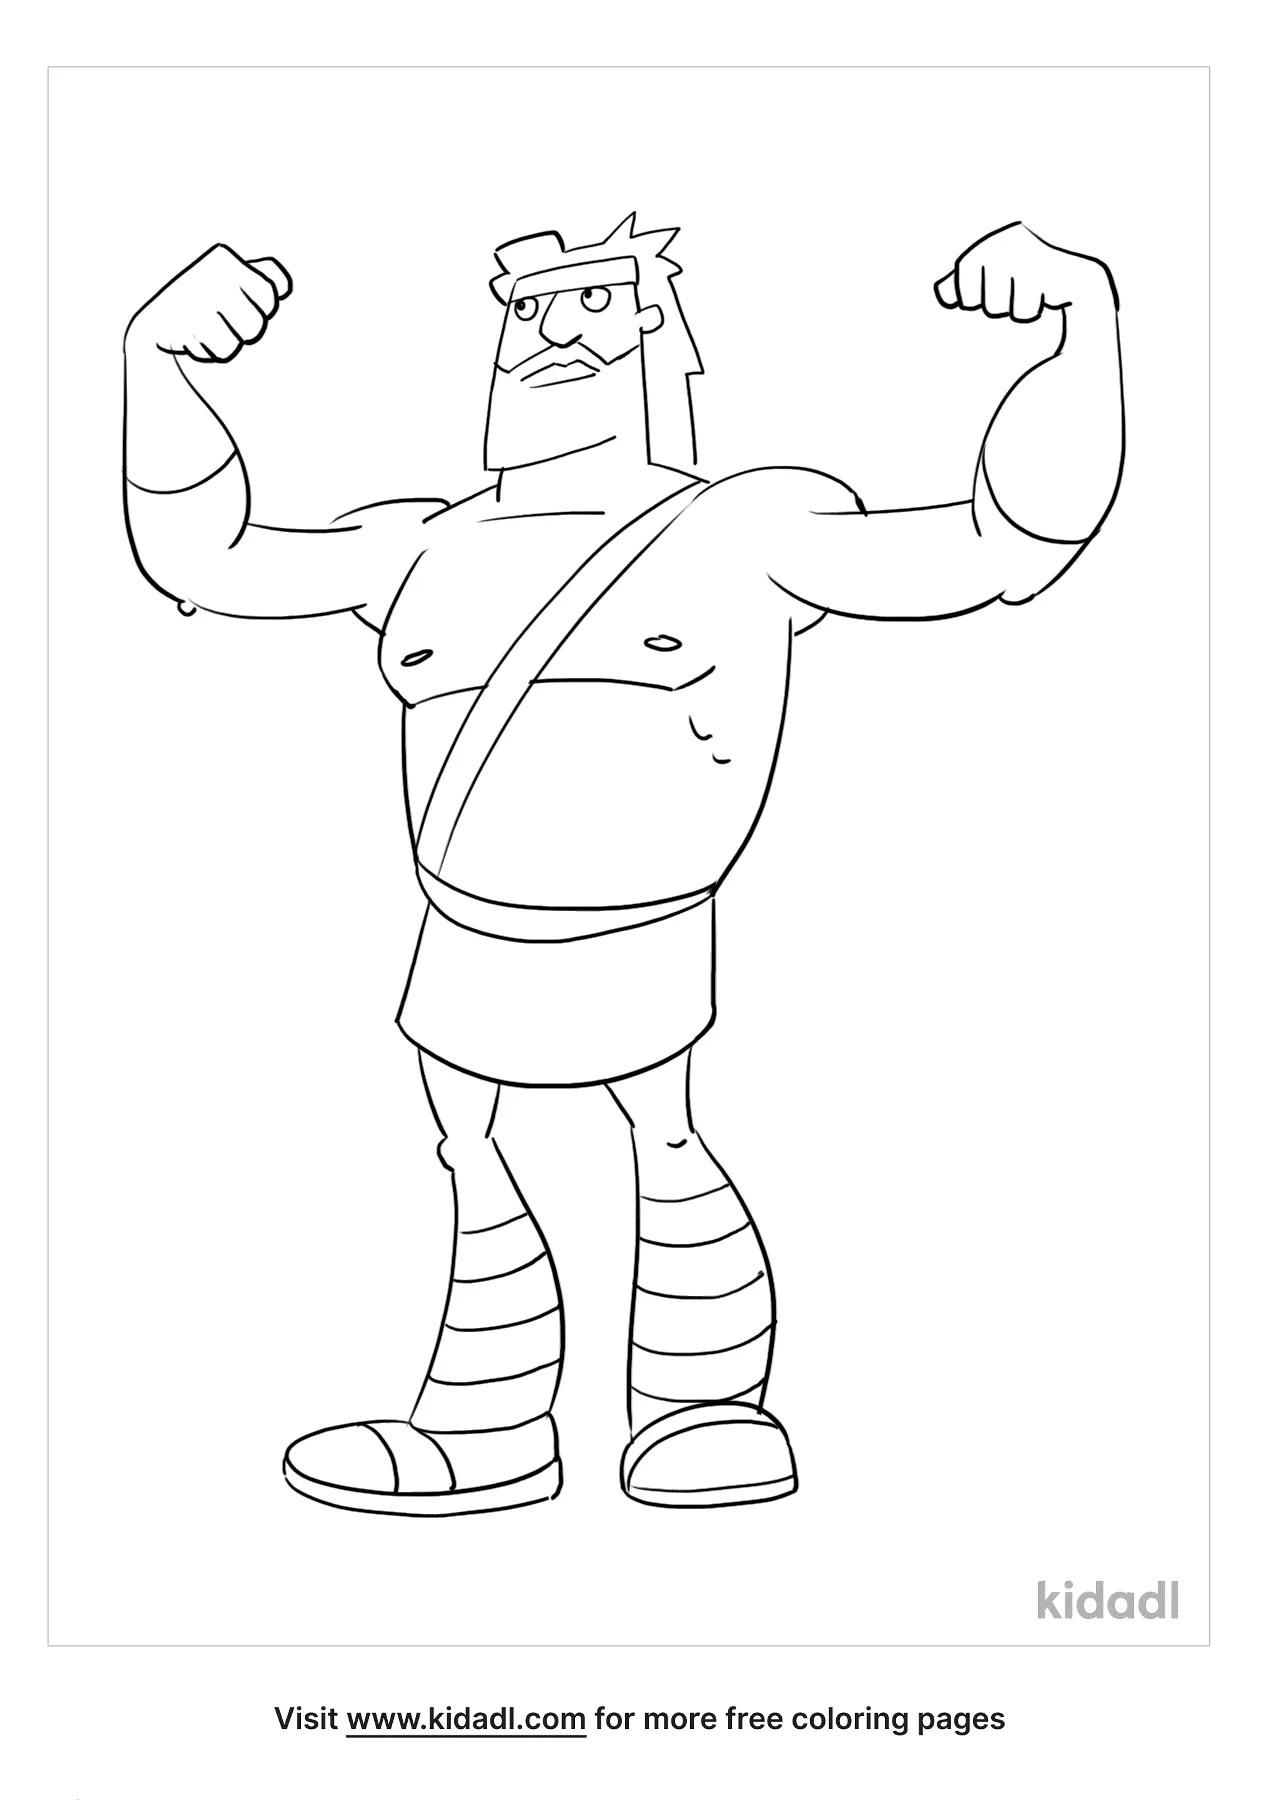 Samson Coloring Pages Free Bible Coloring Pages Kidadl